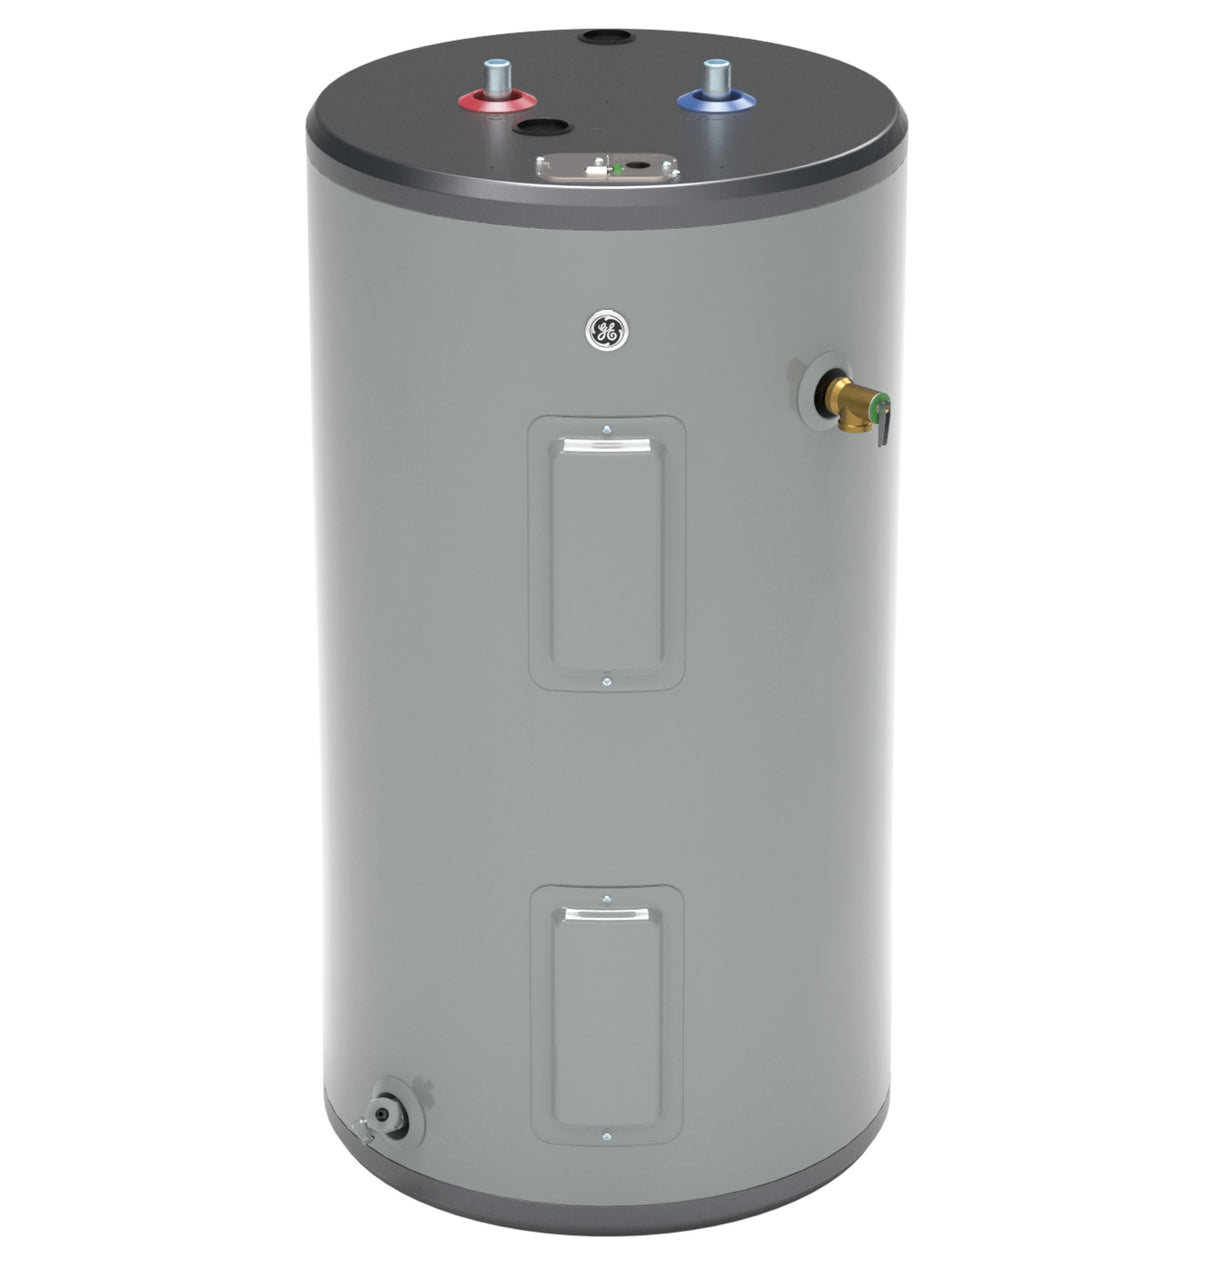 GE(R) 30 Gallon Short Electric Water Heater - (GE30S08BAM)